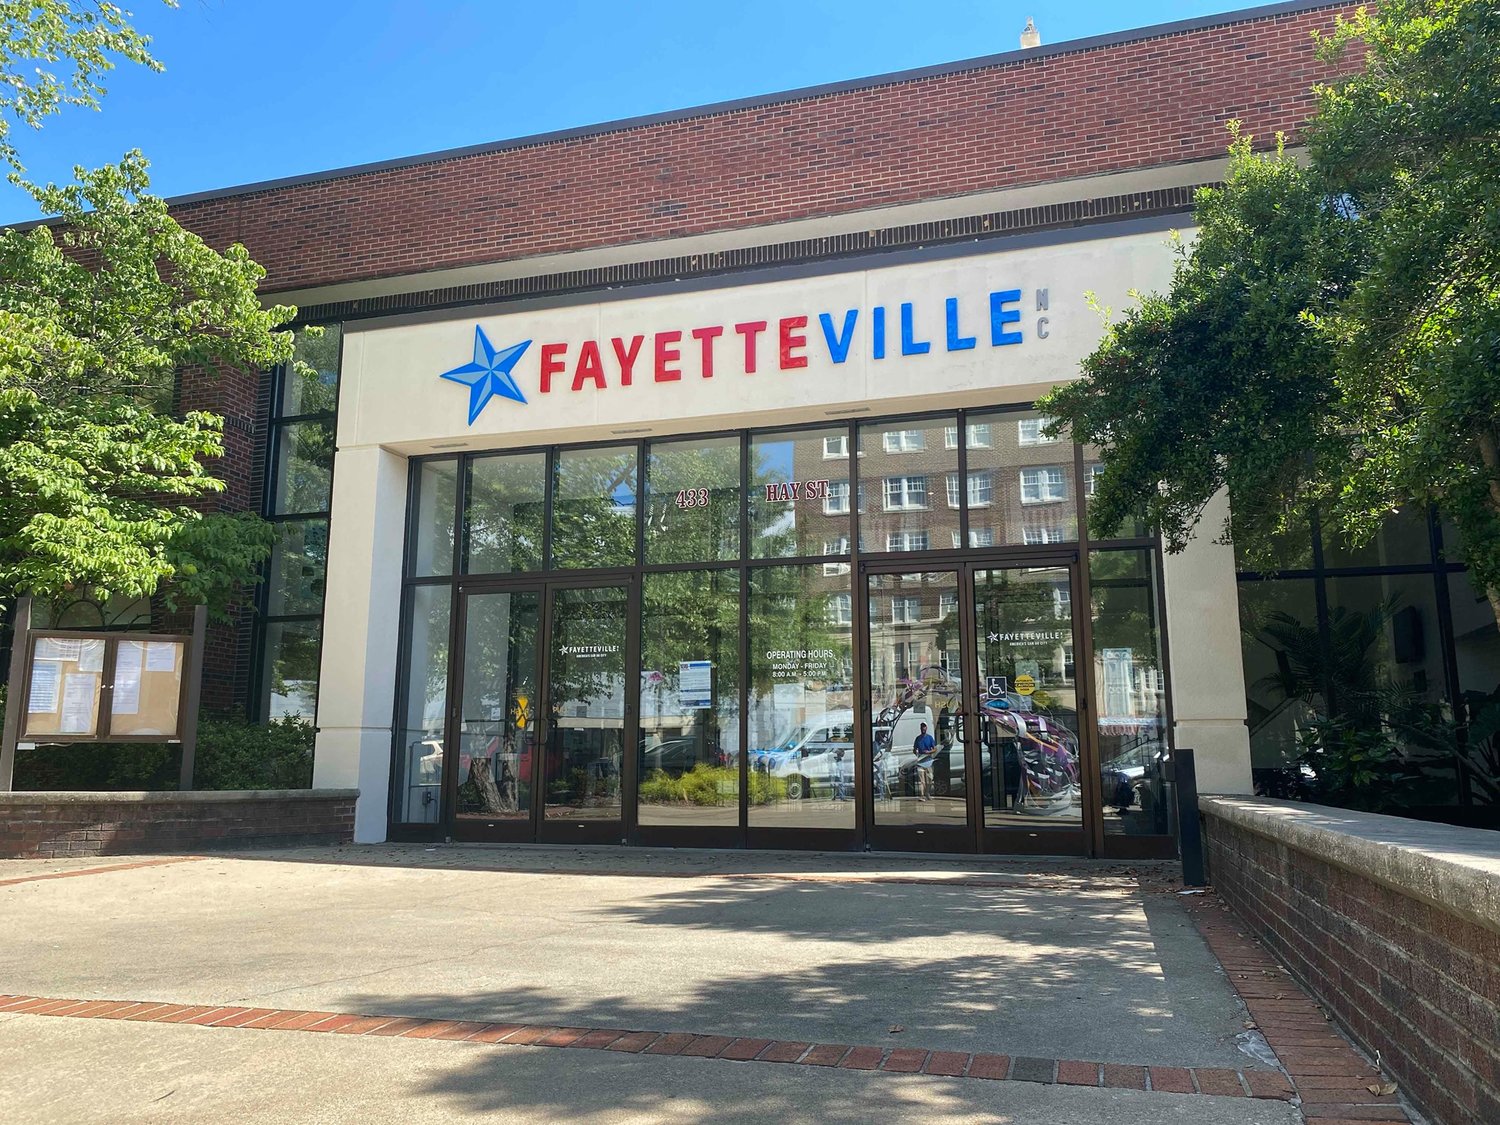 The City Council voted unanimously Monday night to have the Fayetteville Ethics Commission investigate allegations made by former councilwoman Tisha Waddell in her resignation letter.